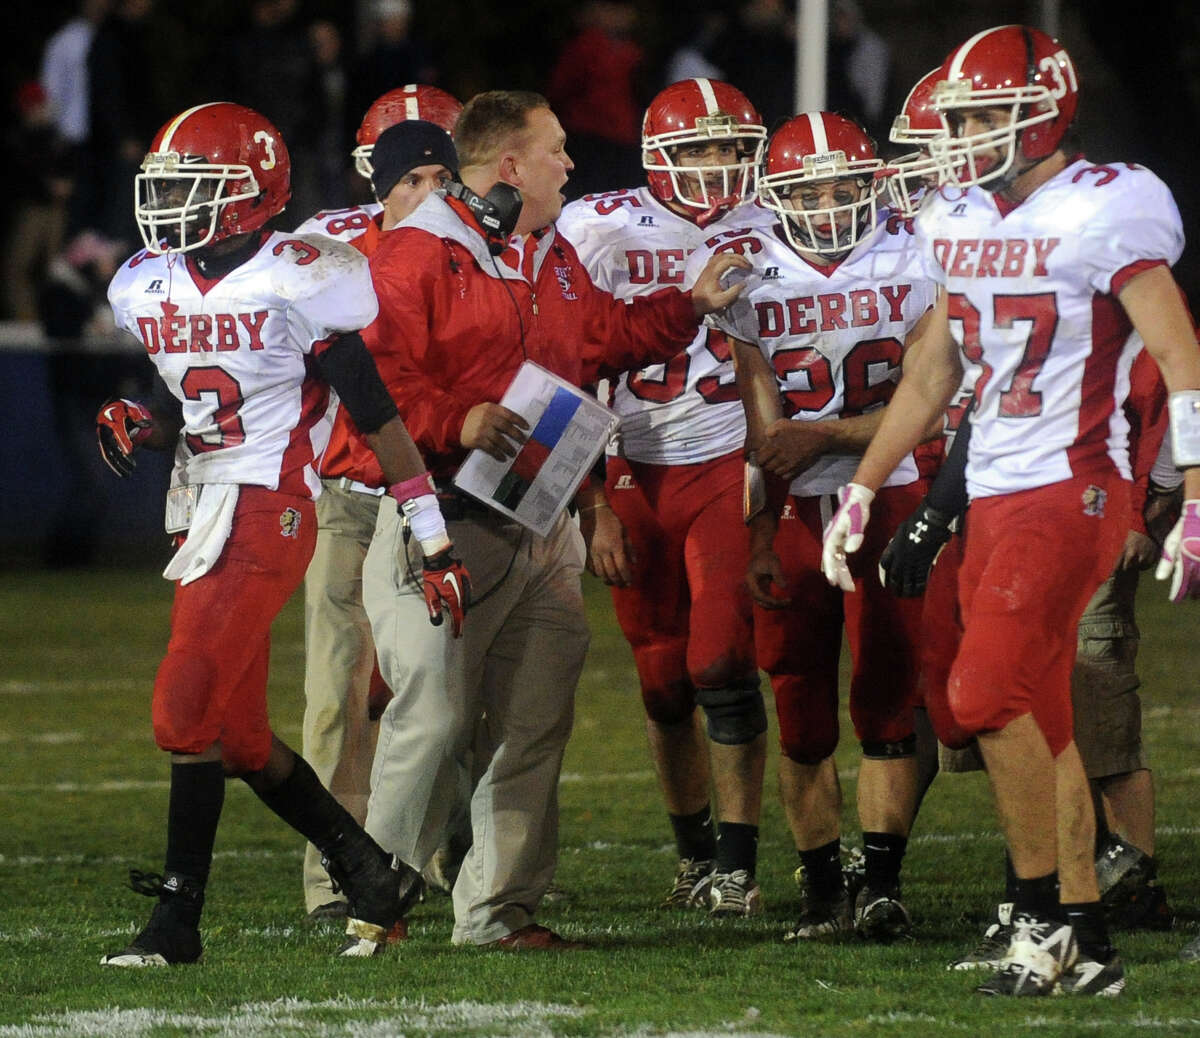 Derby coach George French talks to his team during Friday's game at Jarvis Field in Ansonia on October 29, 2010.